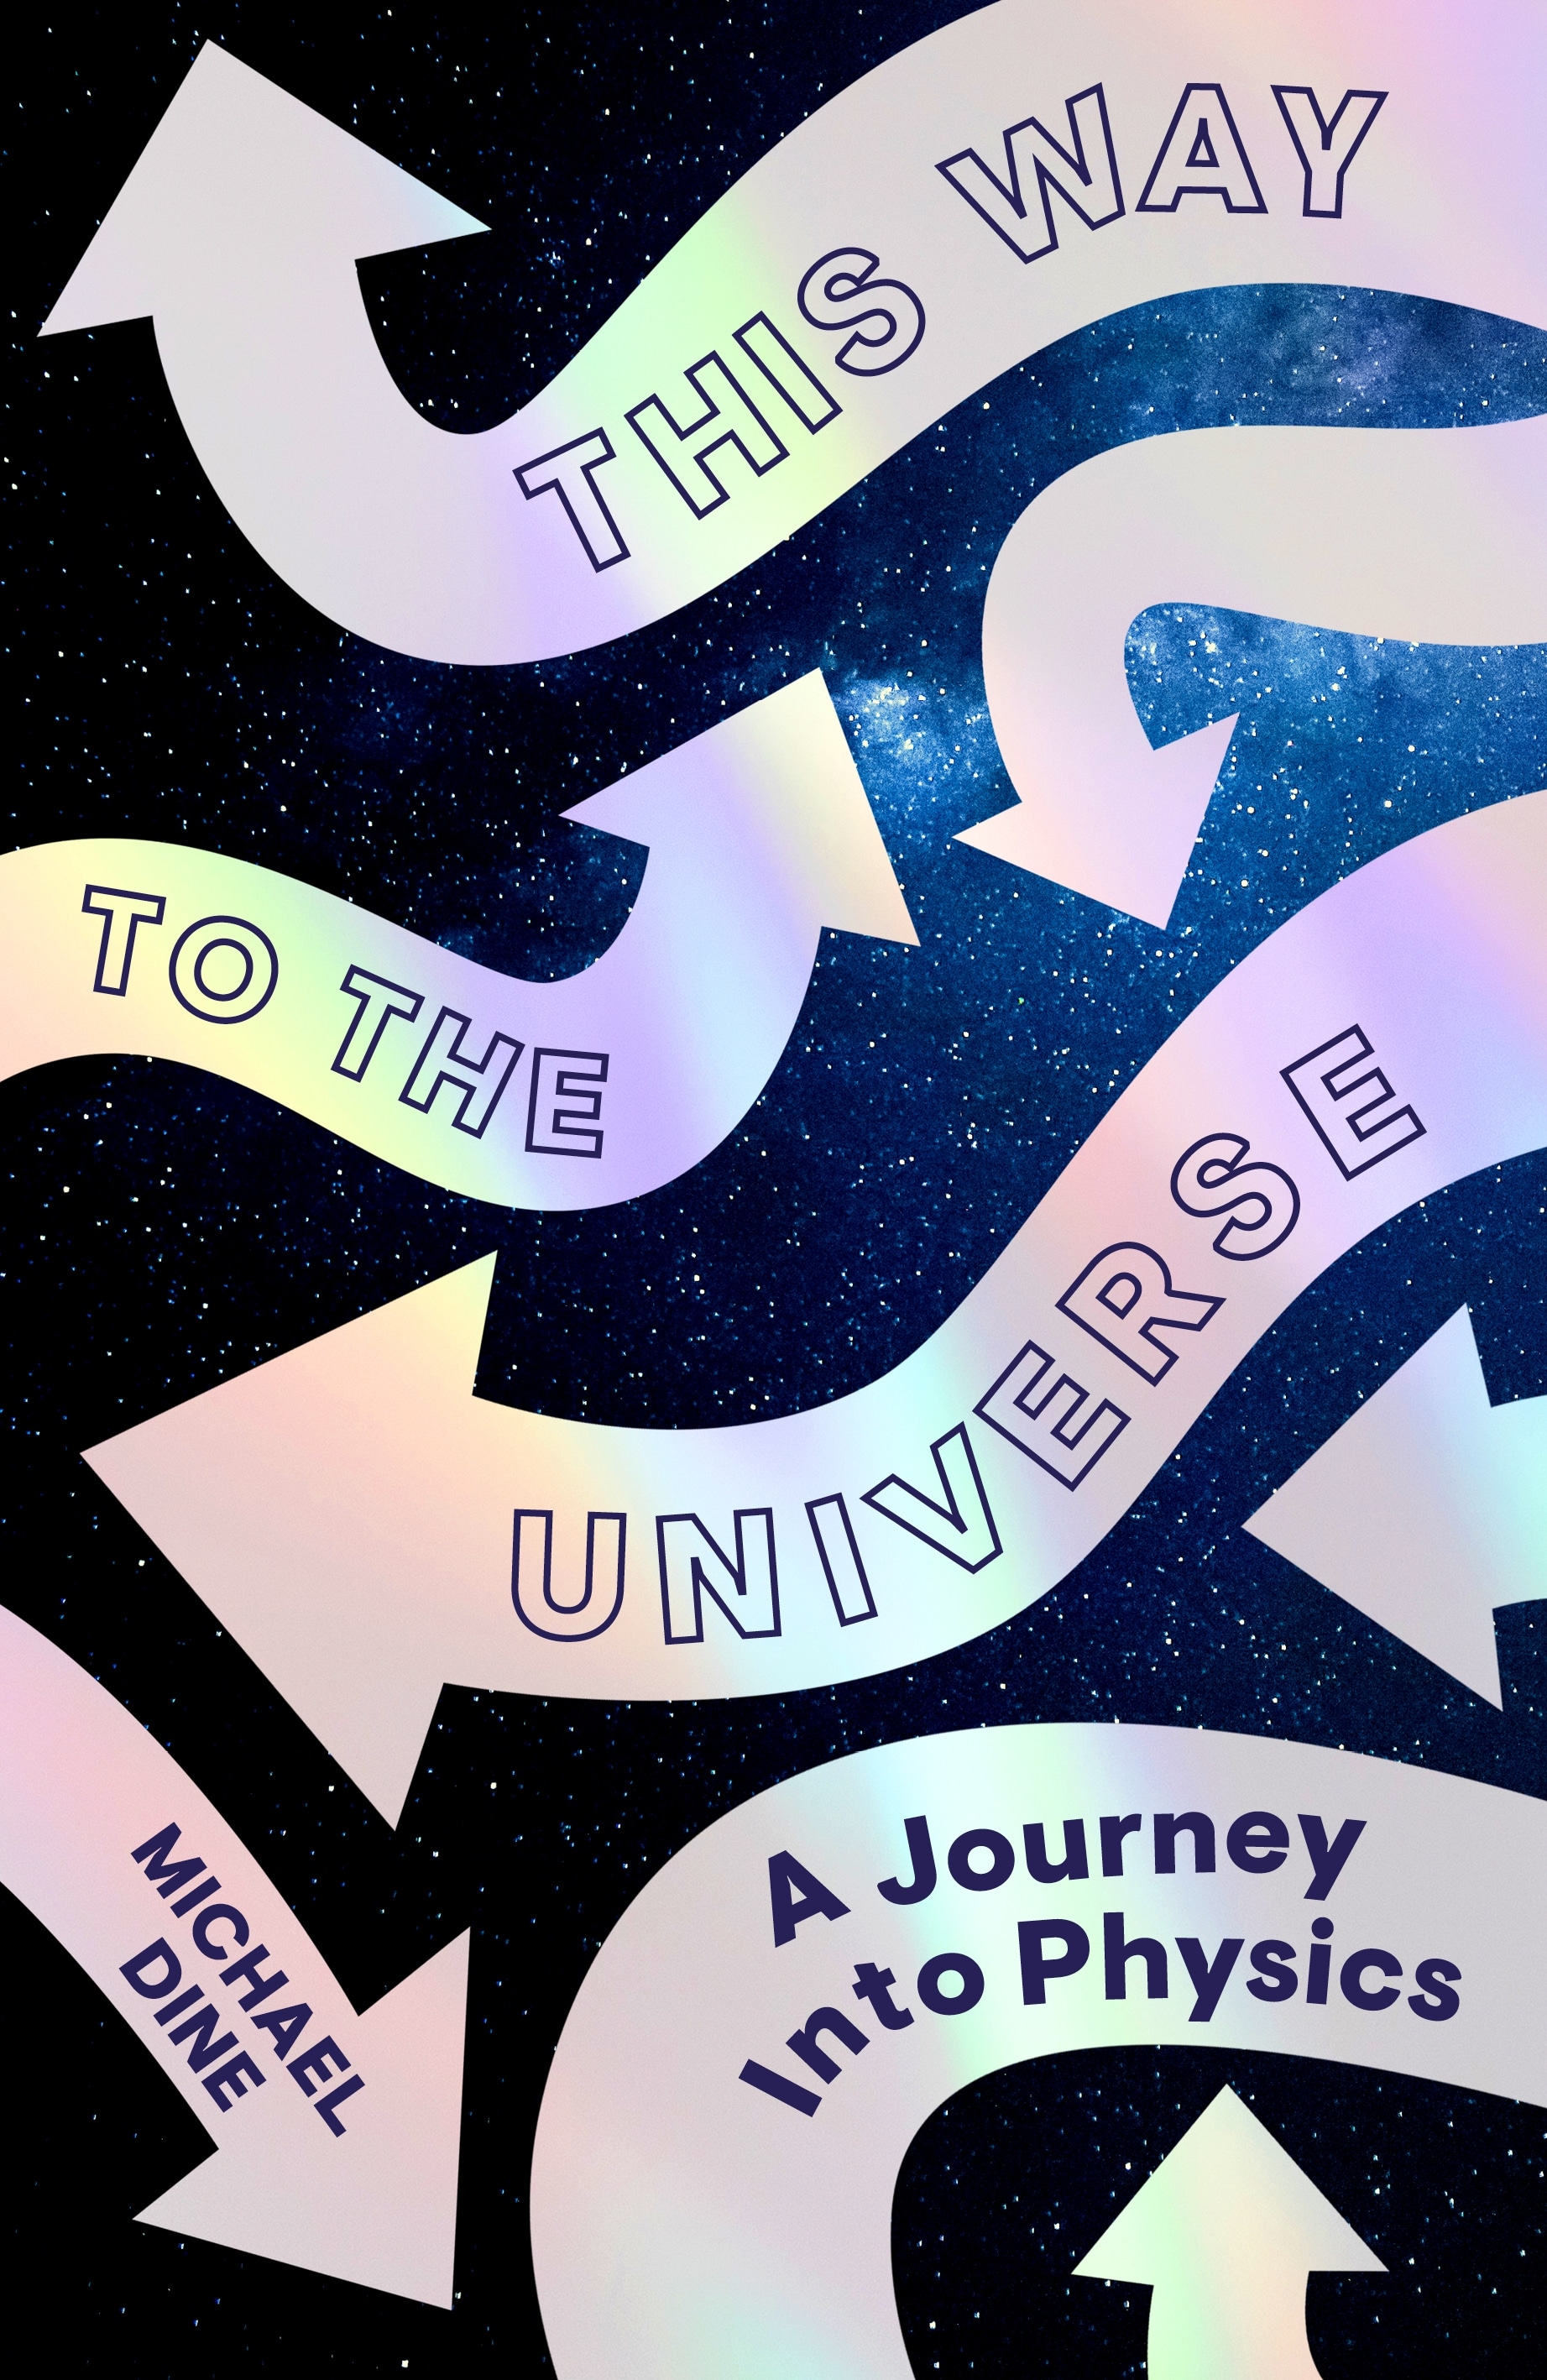 Book “This Way to the Universe” by Michael Dine — February 3, 2022